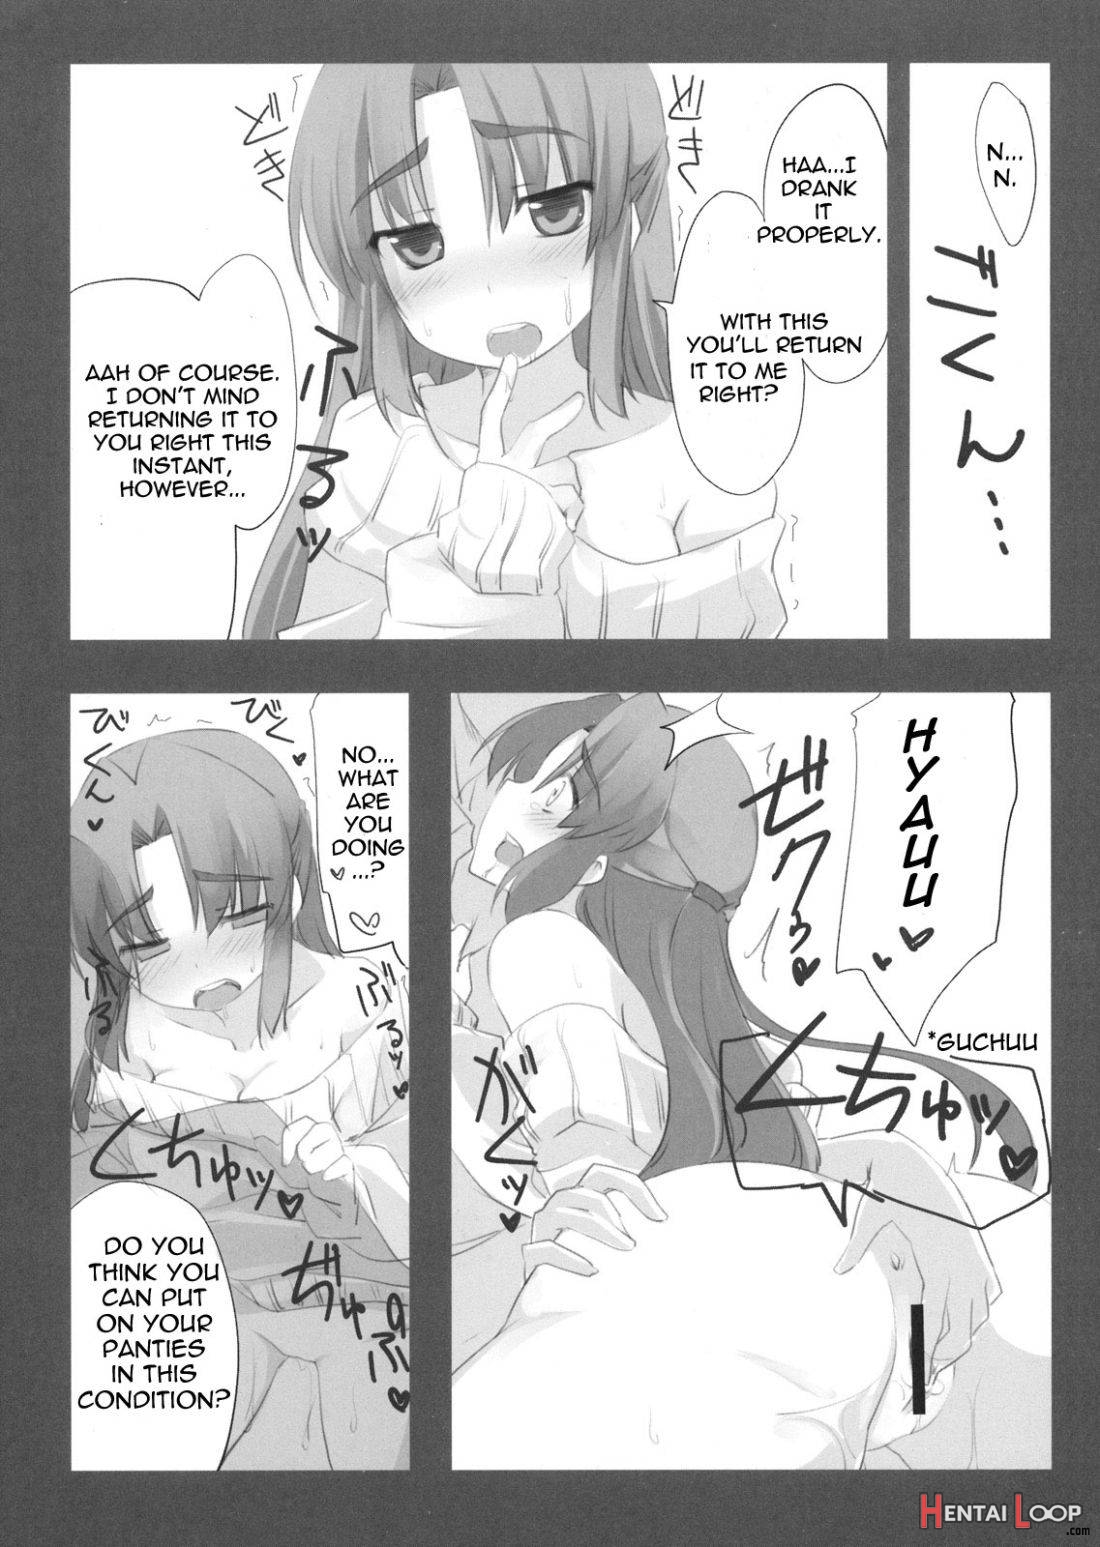 Over Flow Virus Vol. 2 page 6